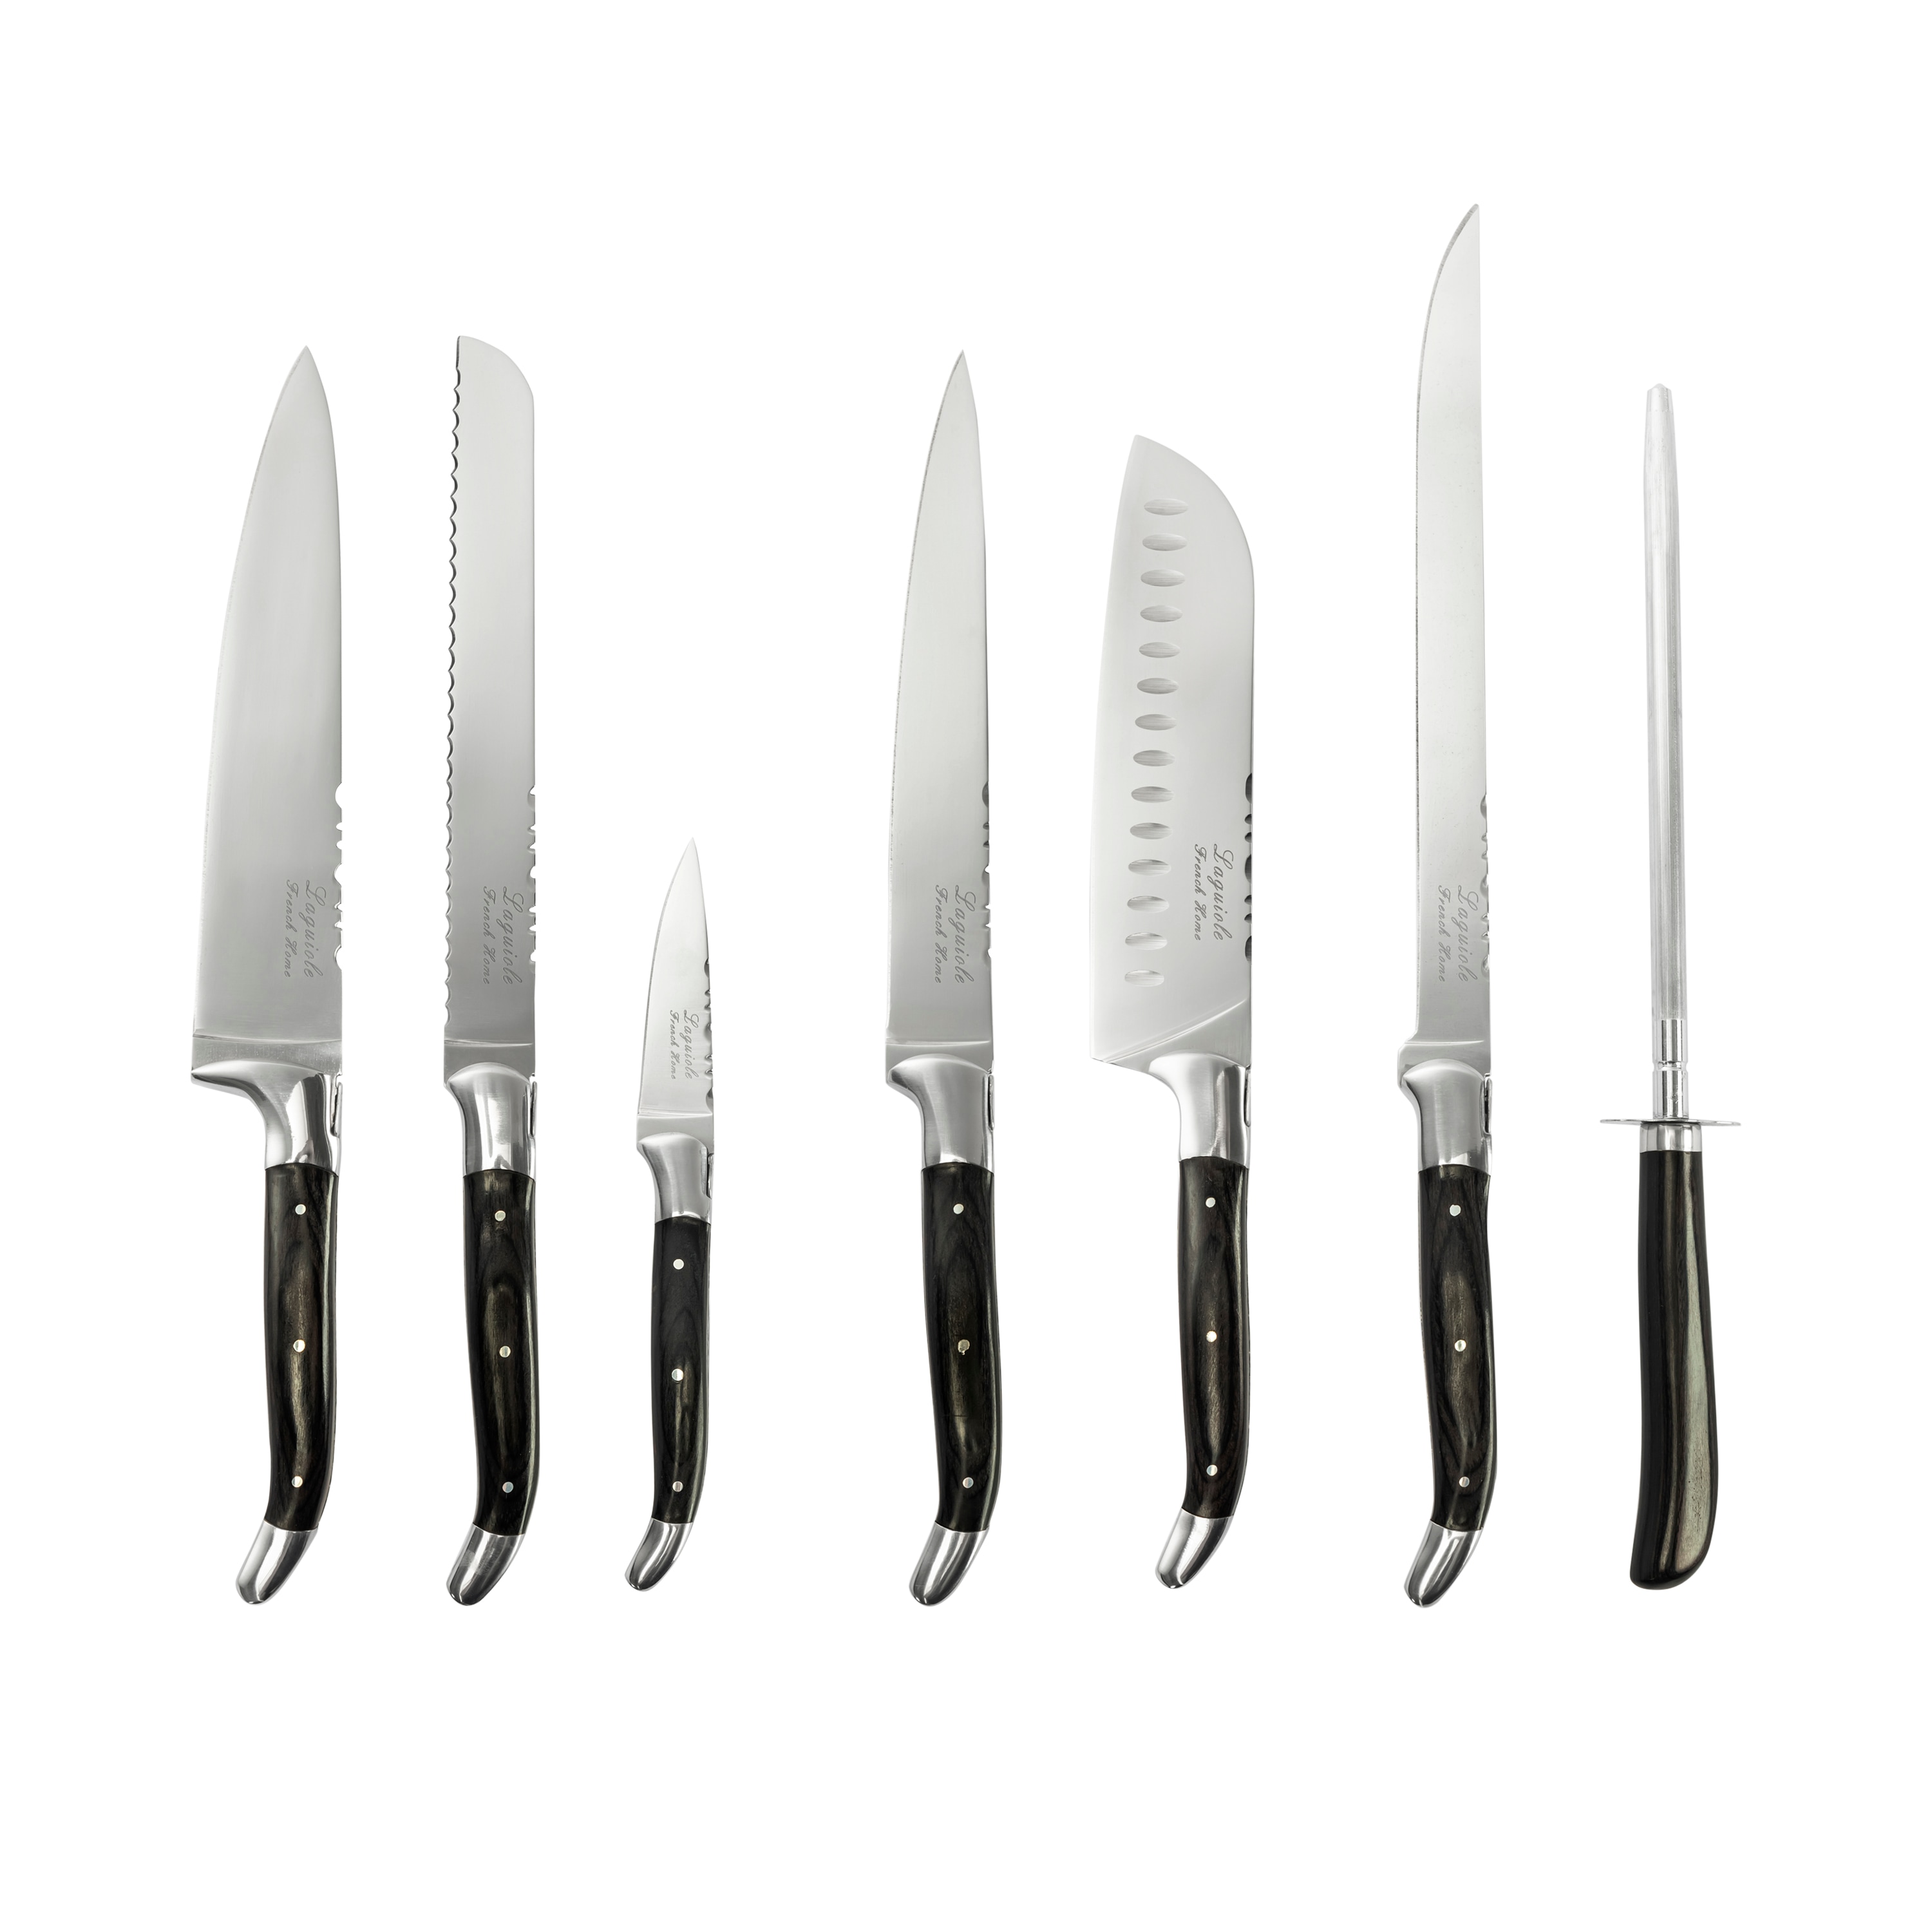 French Home Laguiole Steak Knives, Set of 4 - Shades of Gray